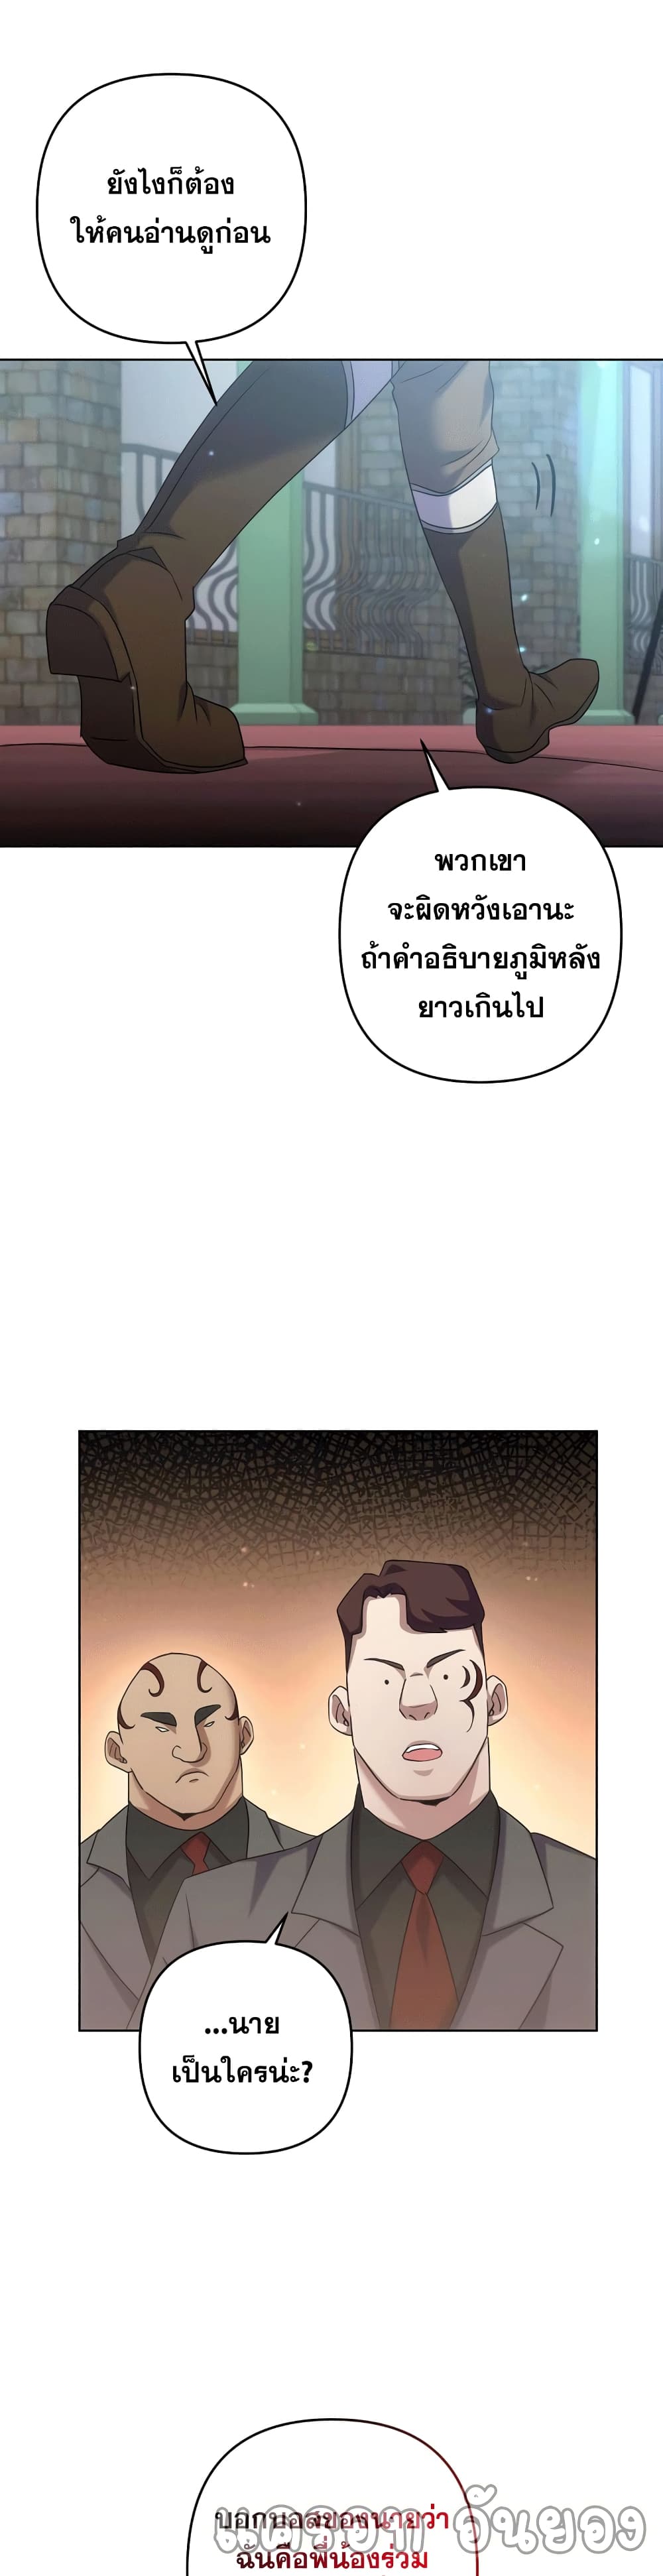 Surviving in an Action Manhwa 19-19